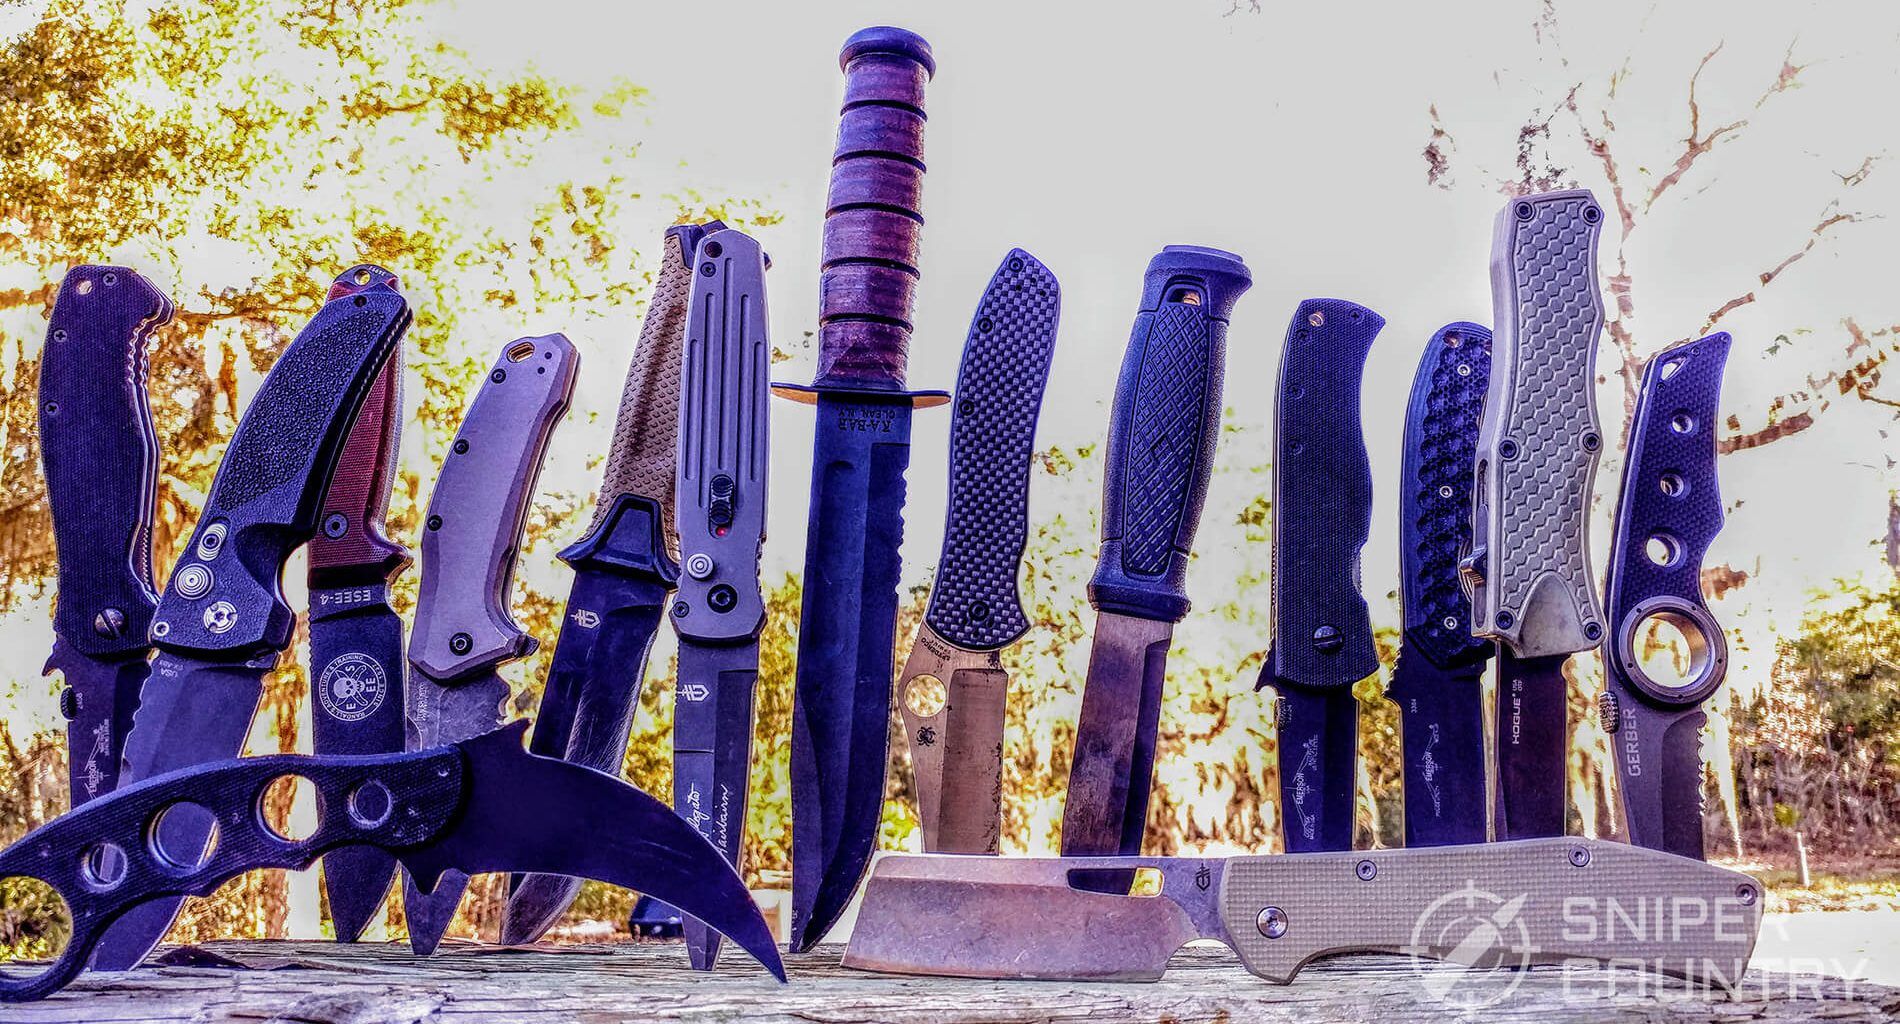 The Best Tactical Knives From Our Favorite Brands